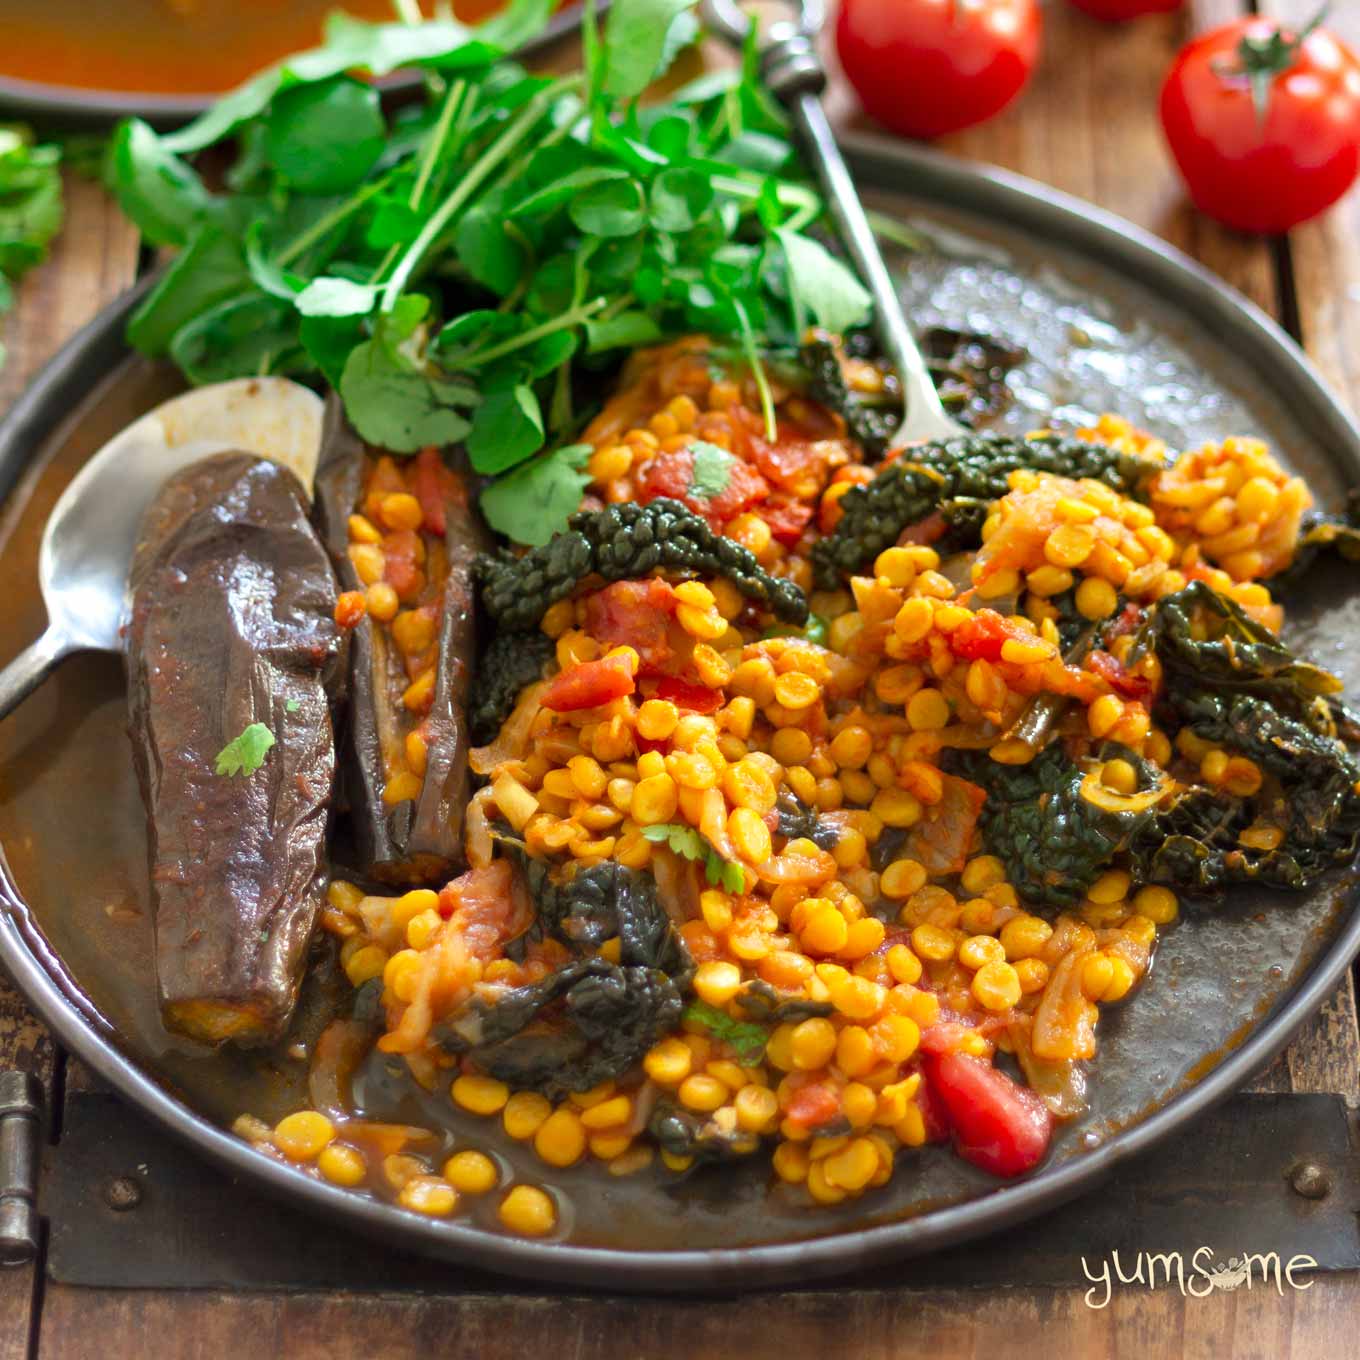 vegan spicy dal, aubergine, and kale casserole on a plate, and salad | yumsome.com